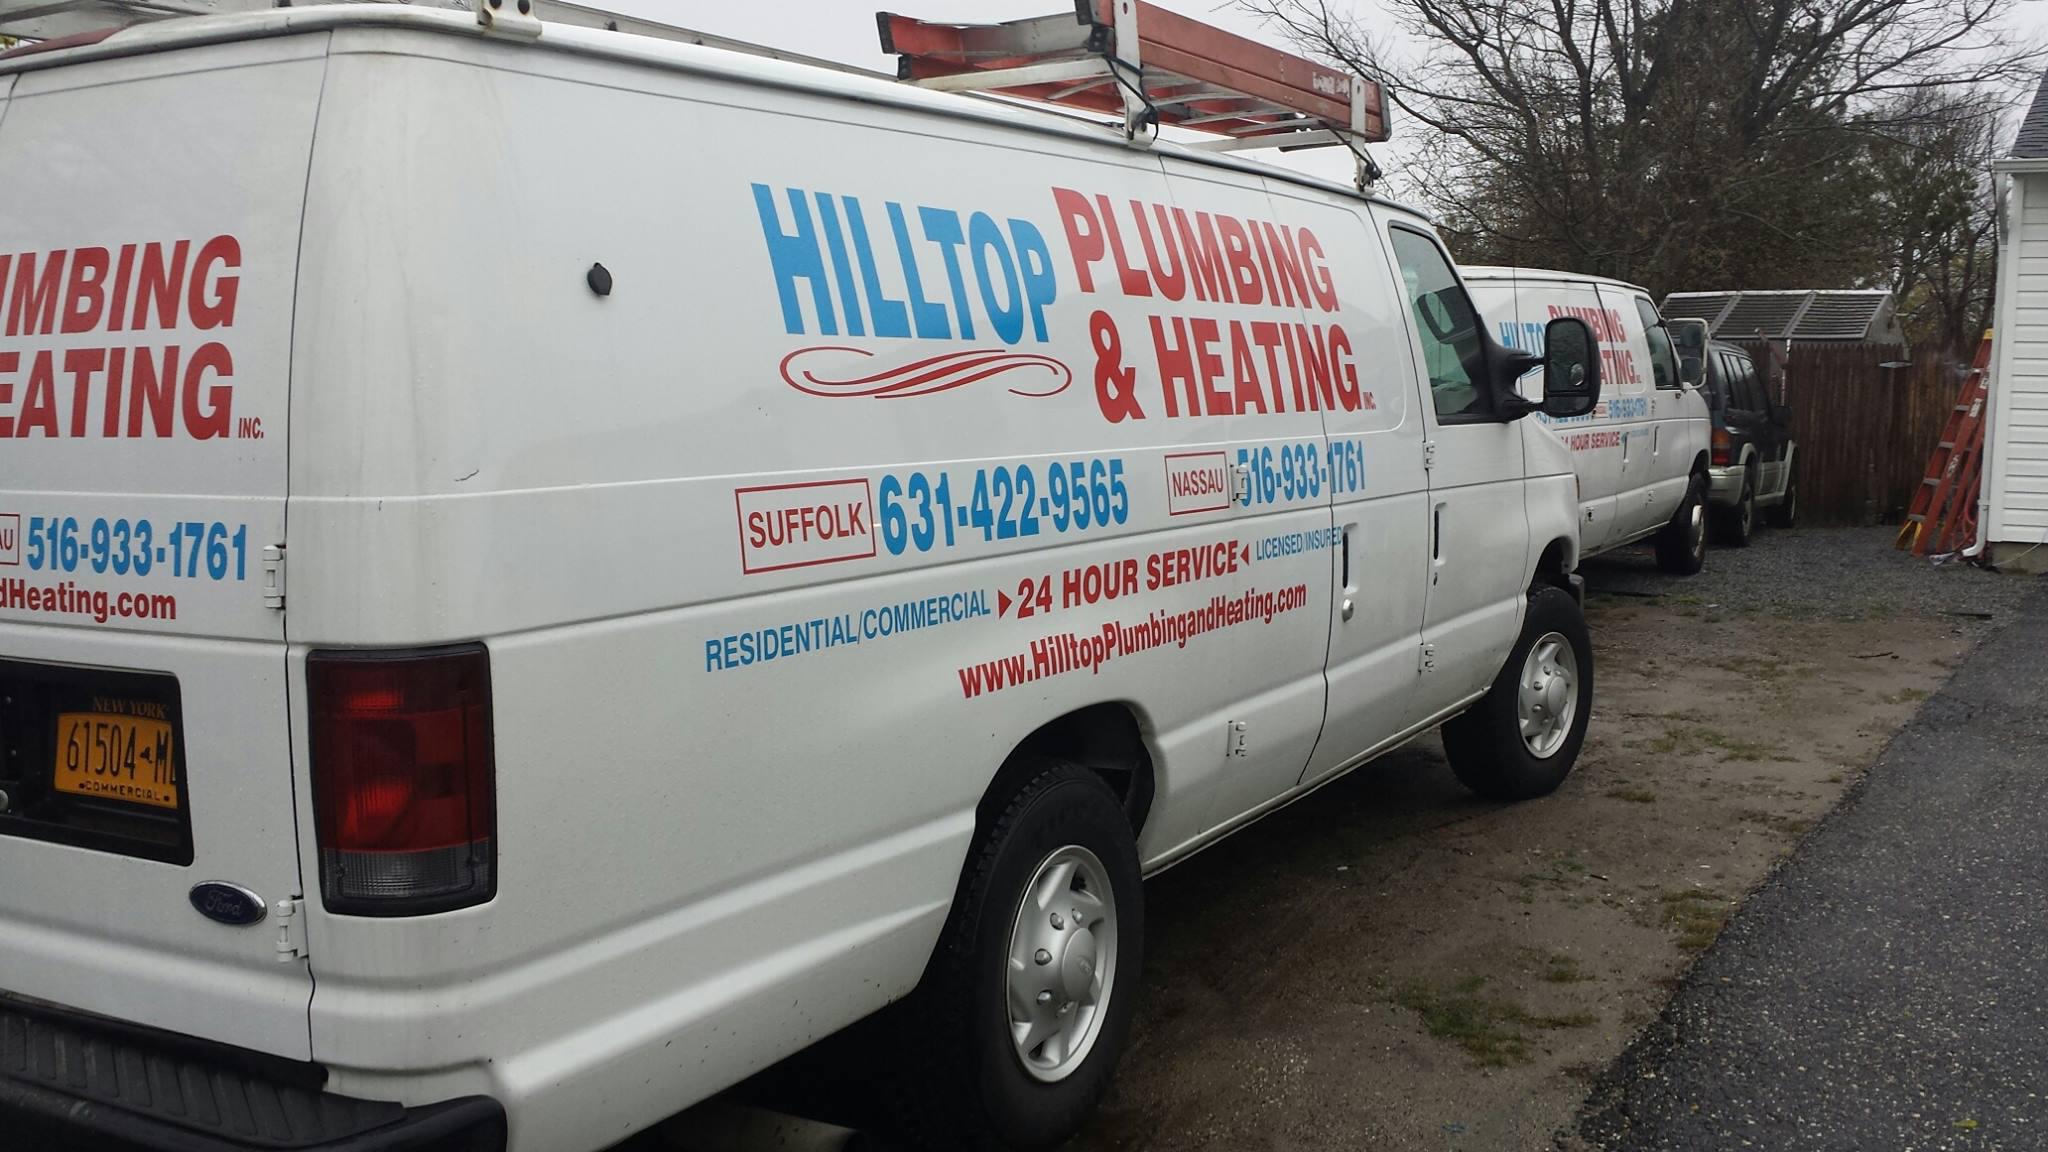 Call our certified technicians for your plumbing and heating needs!